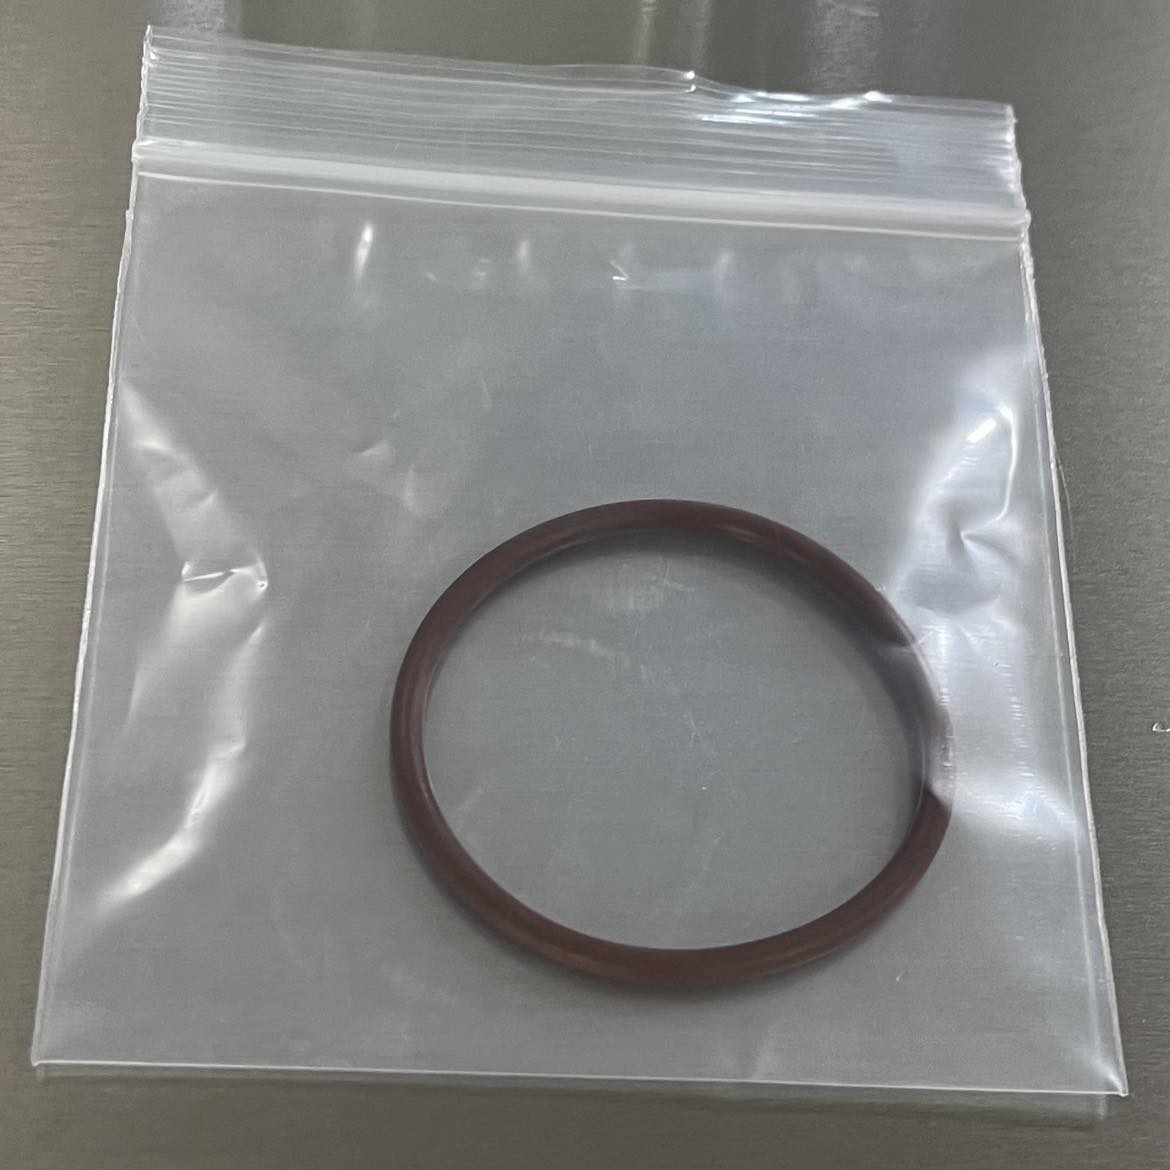 Replacement Wastegate Piston O-Ring - Black Sheep Industries Inc.